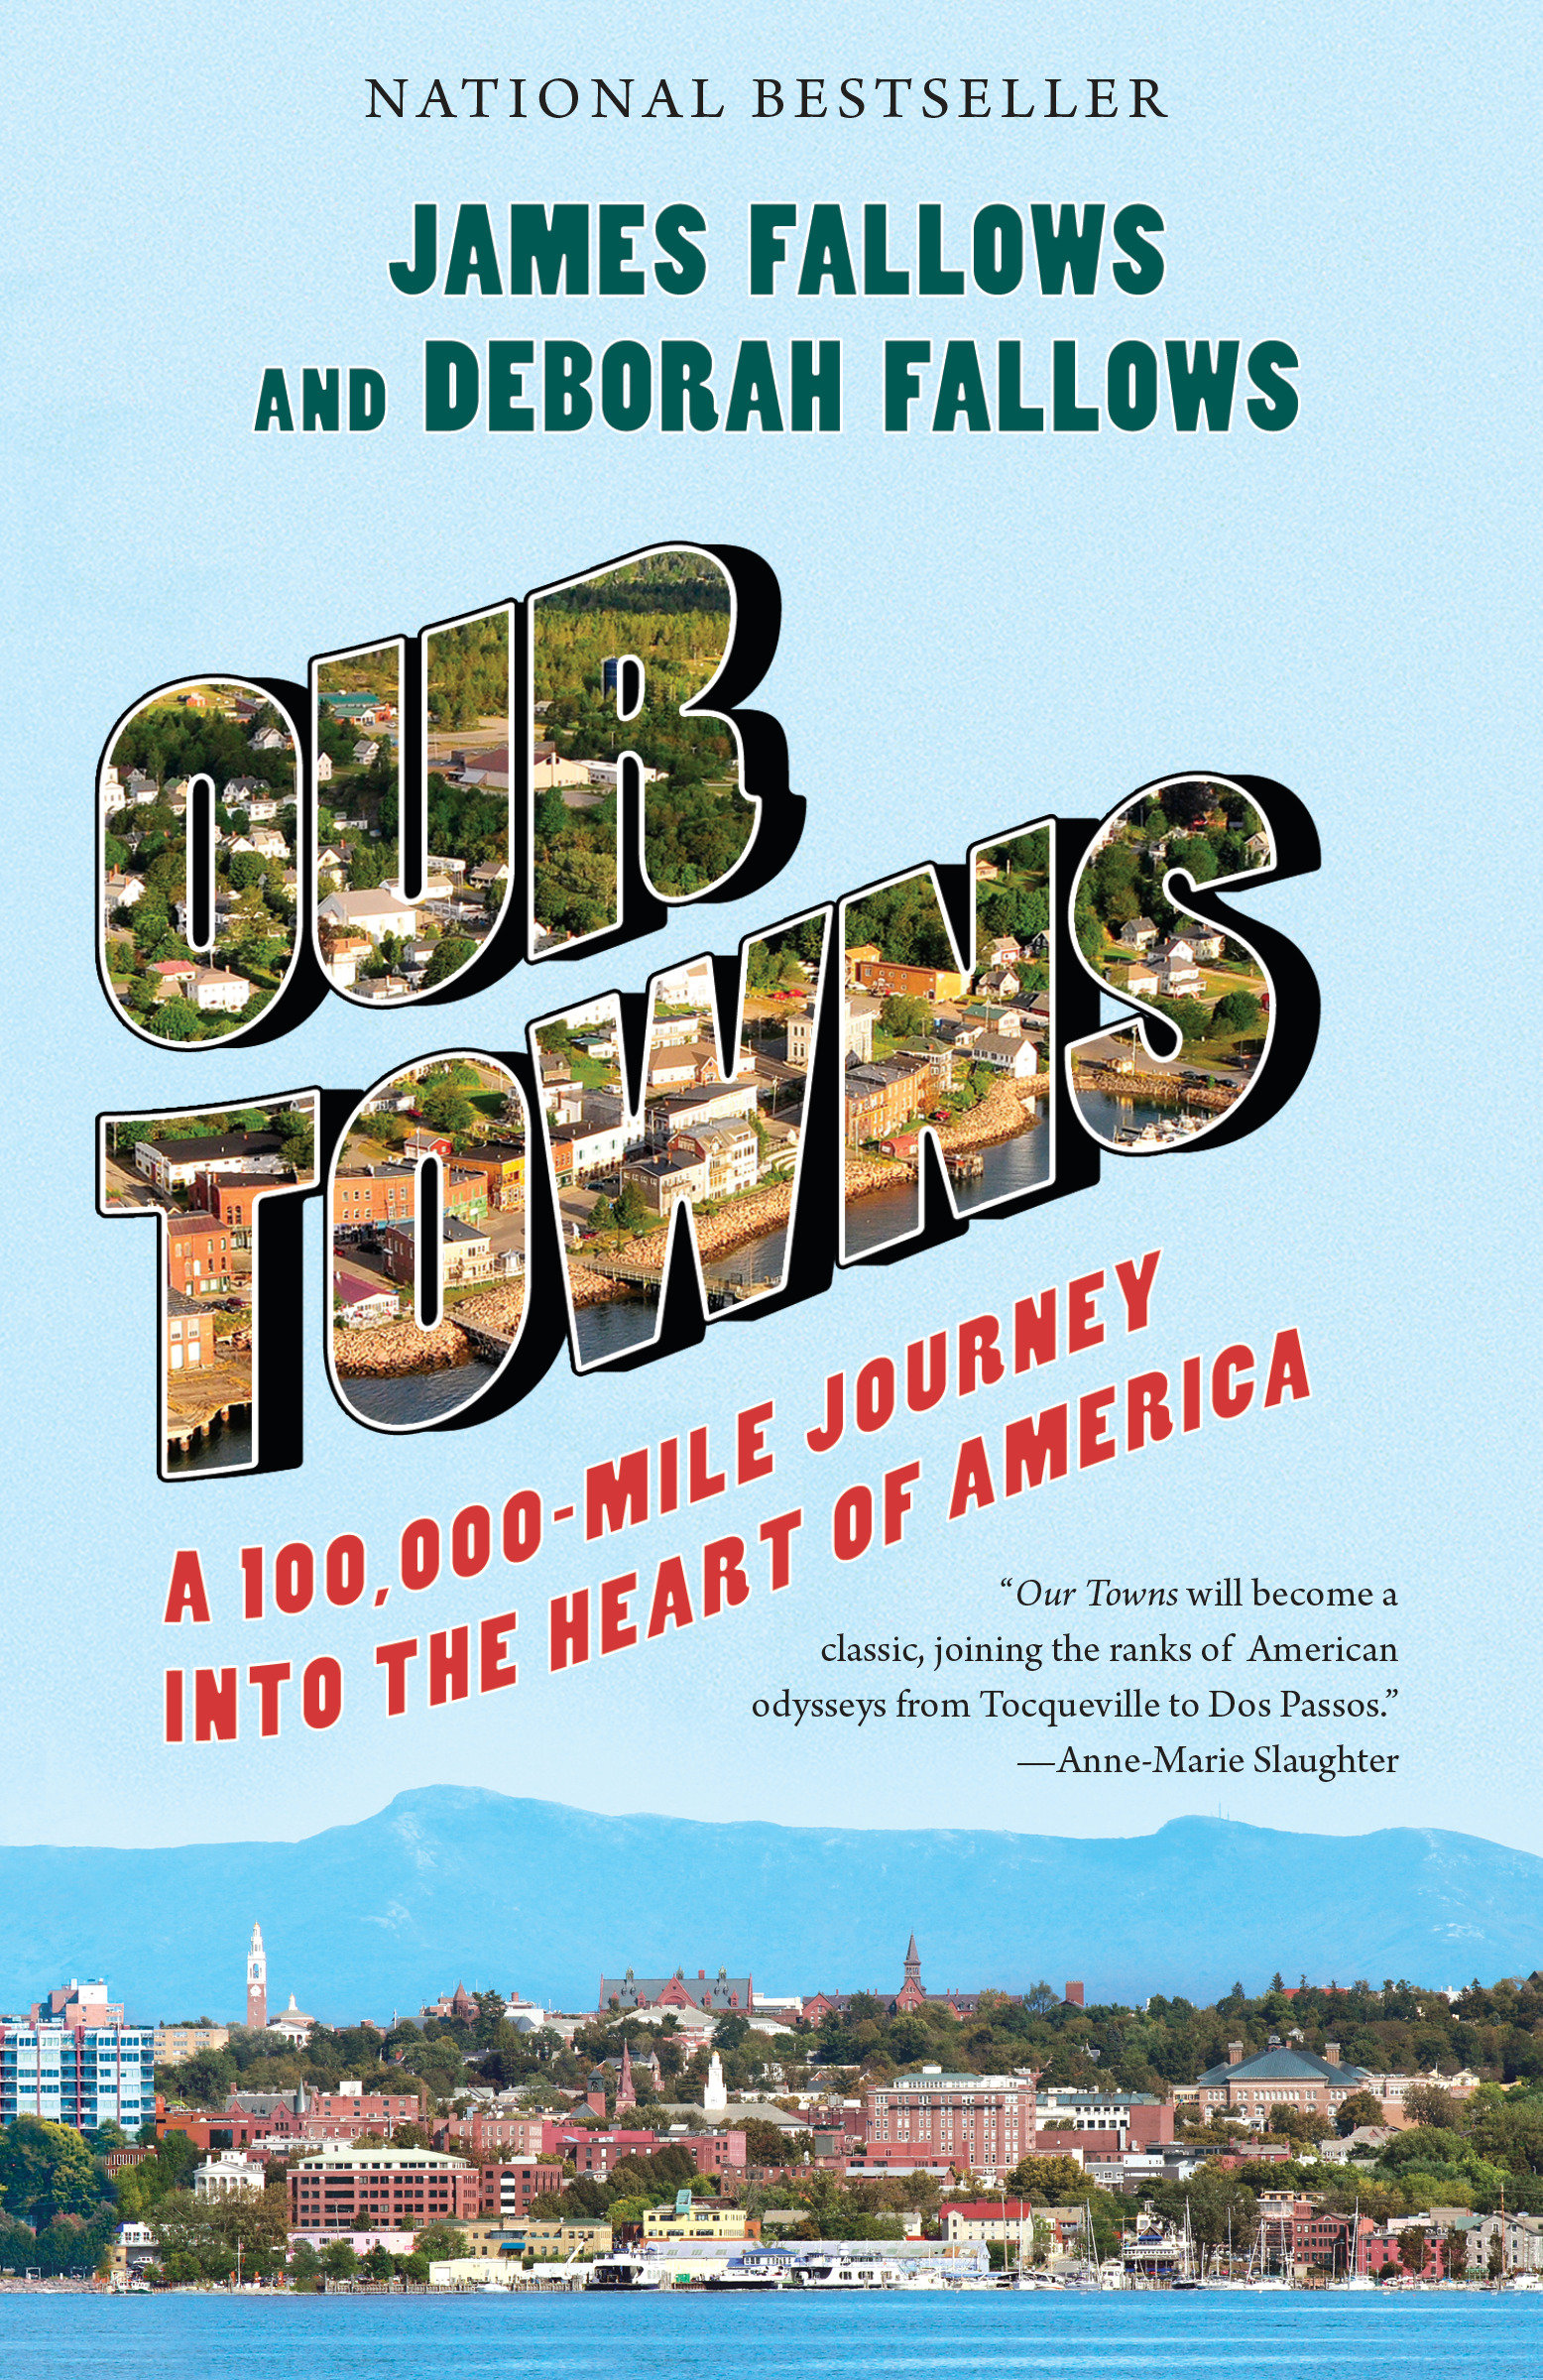 Our towns a 100,000-mile journey into the heart of America cover image